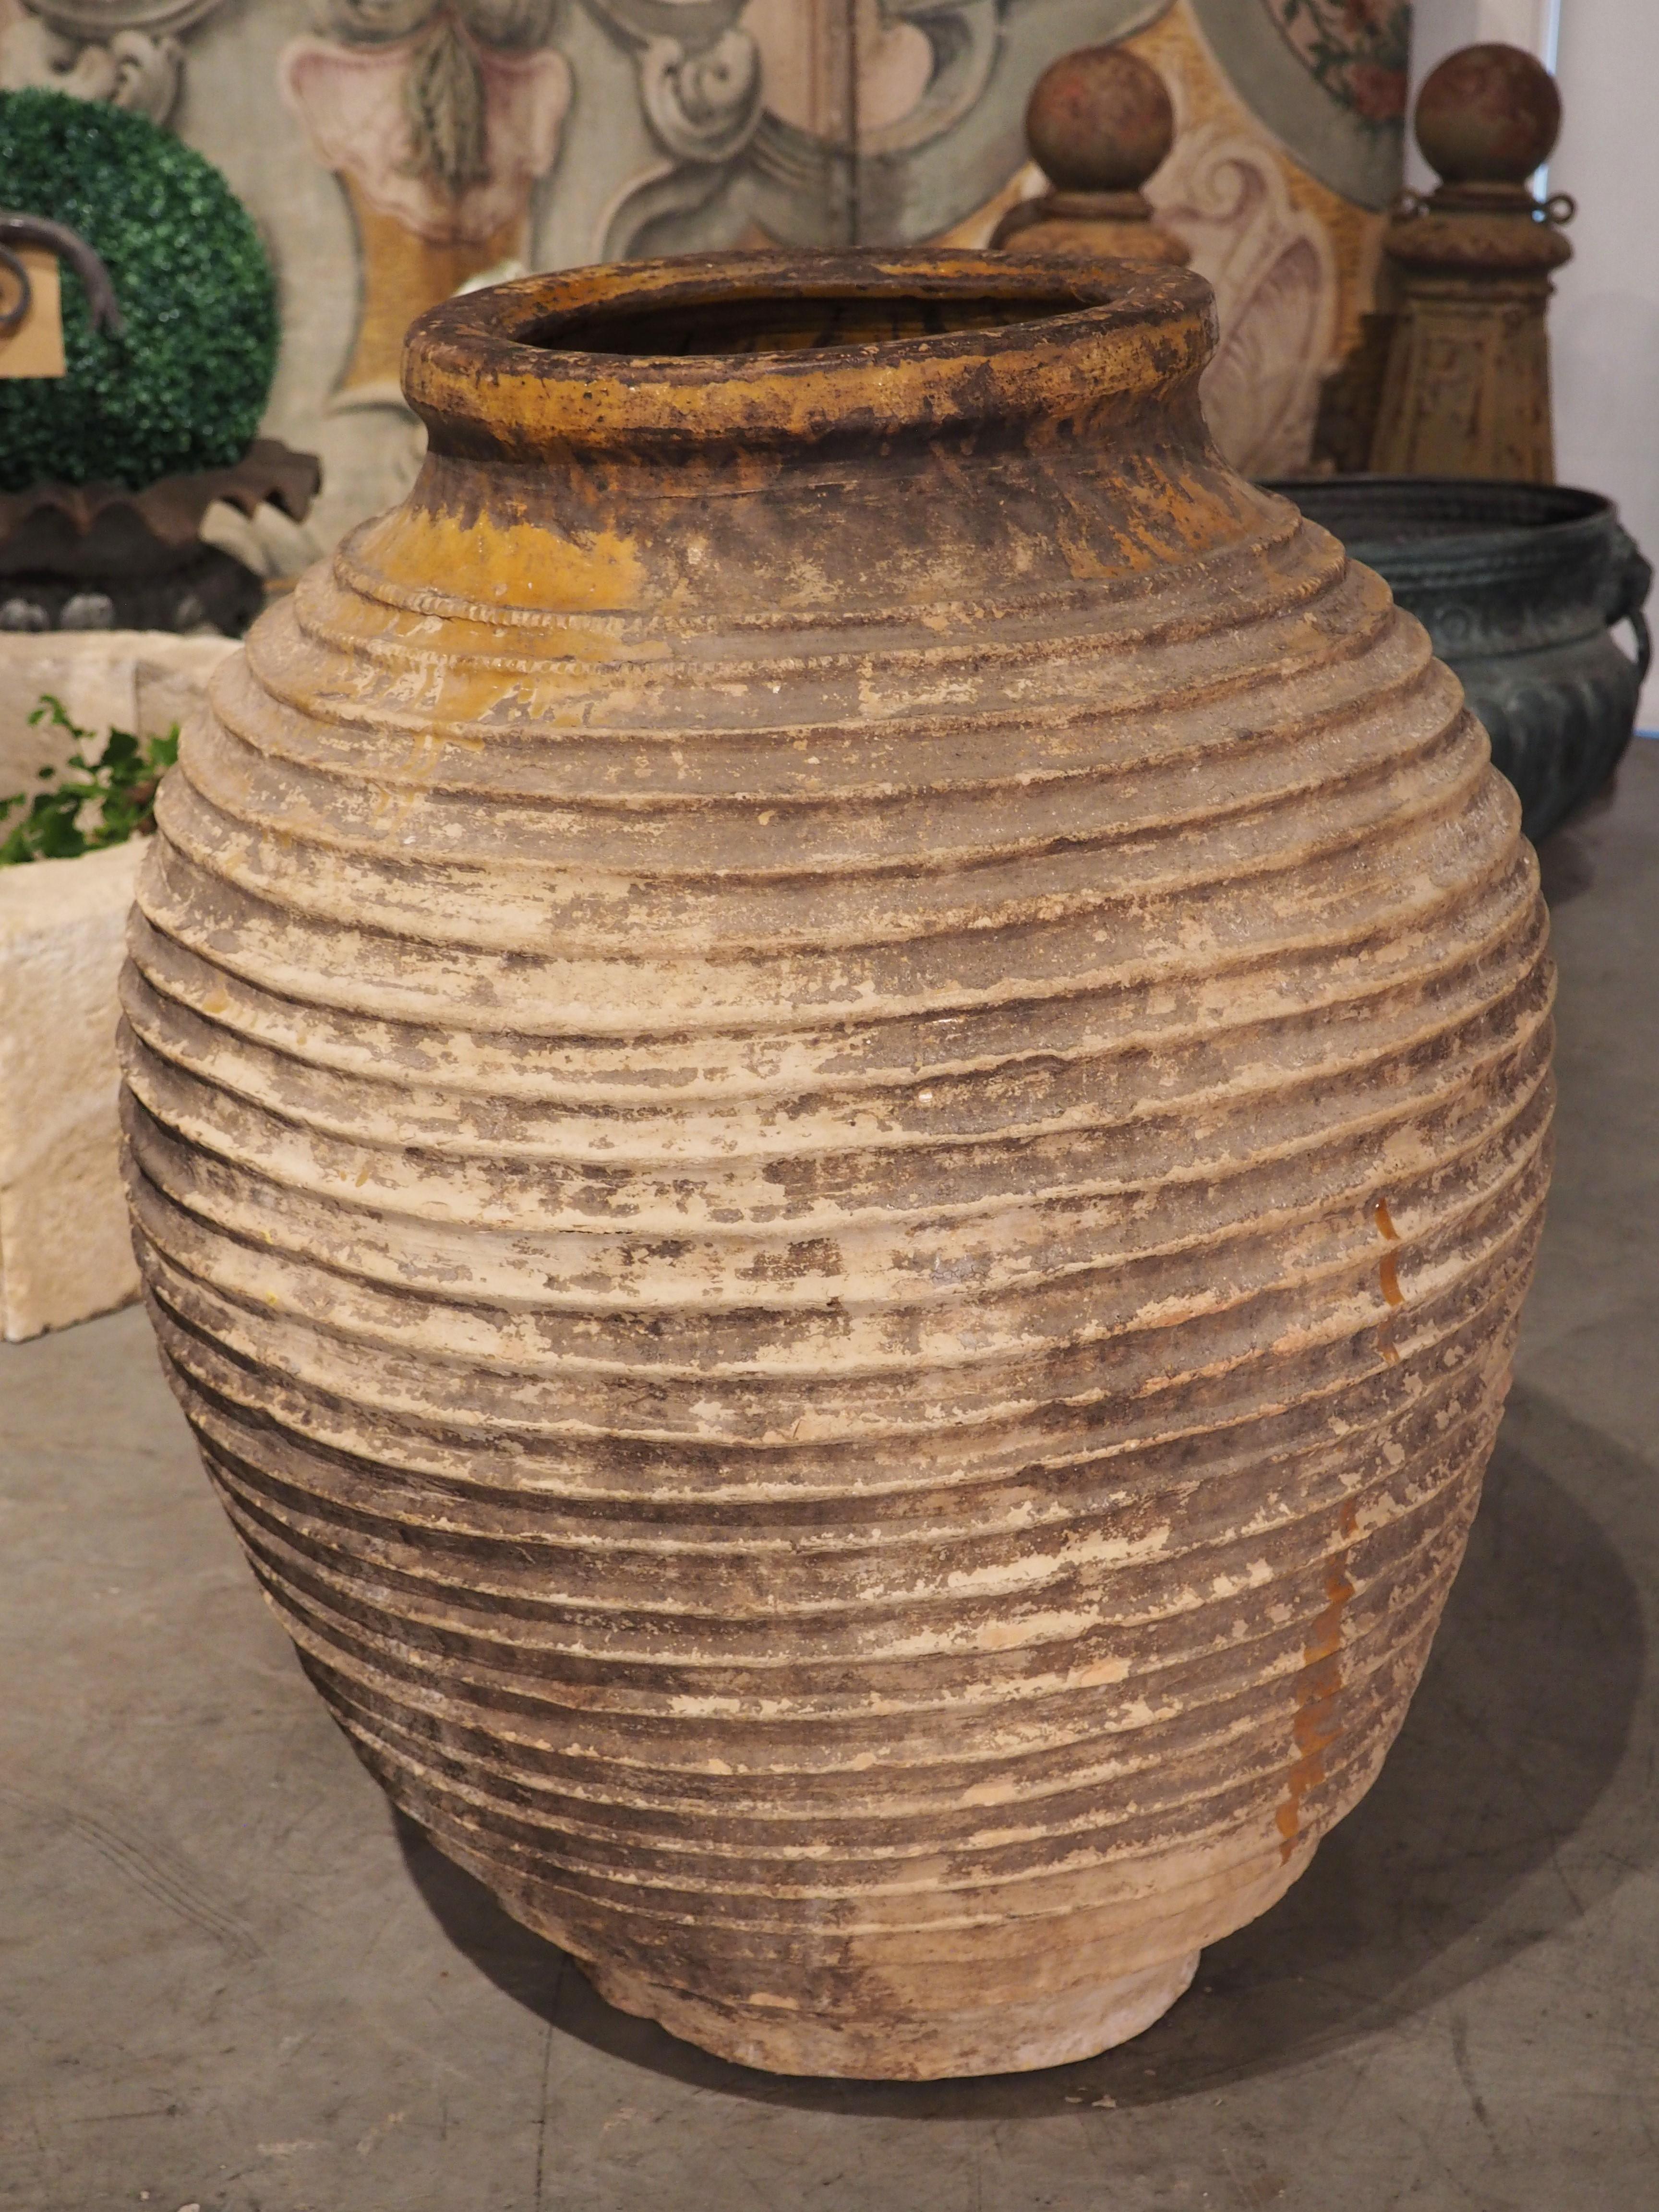 This ribbed terra cotta oil pot with partial ochre glaze was hand thrown circa 1850. The form is known as a koroniotiko, which comes from the town of Koroni (sometimes known as Corone), in the Peloponnese region of southern Greece. Koroniotiko have